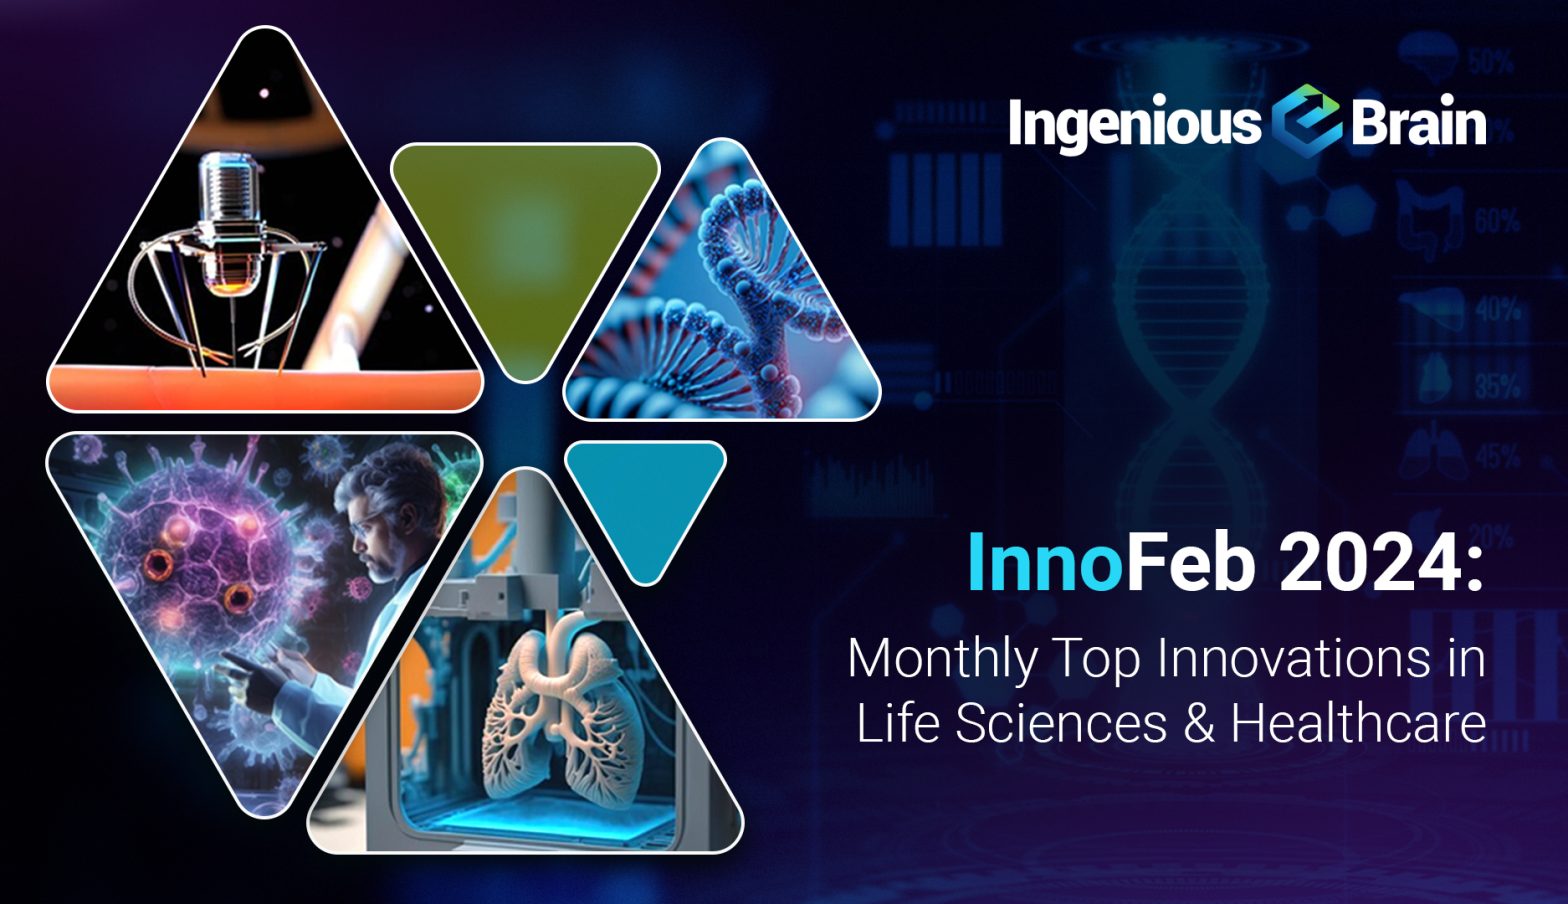 InnFeb 2024: Monthly Top Innovations in Life Sciences and Healthcare